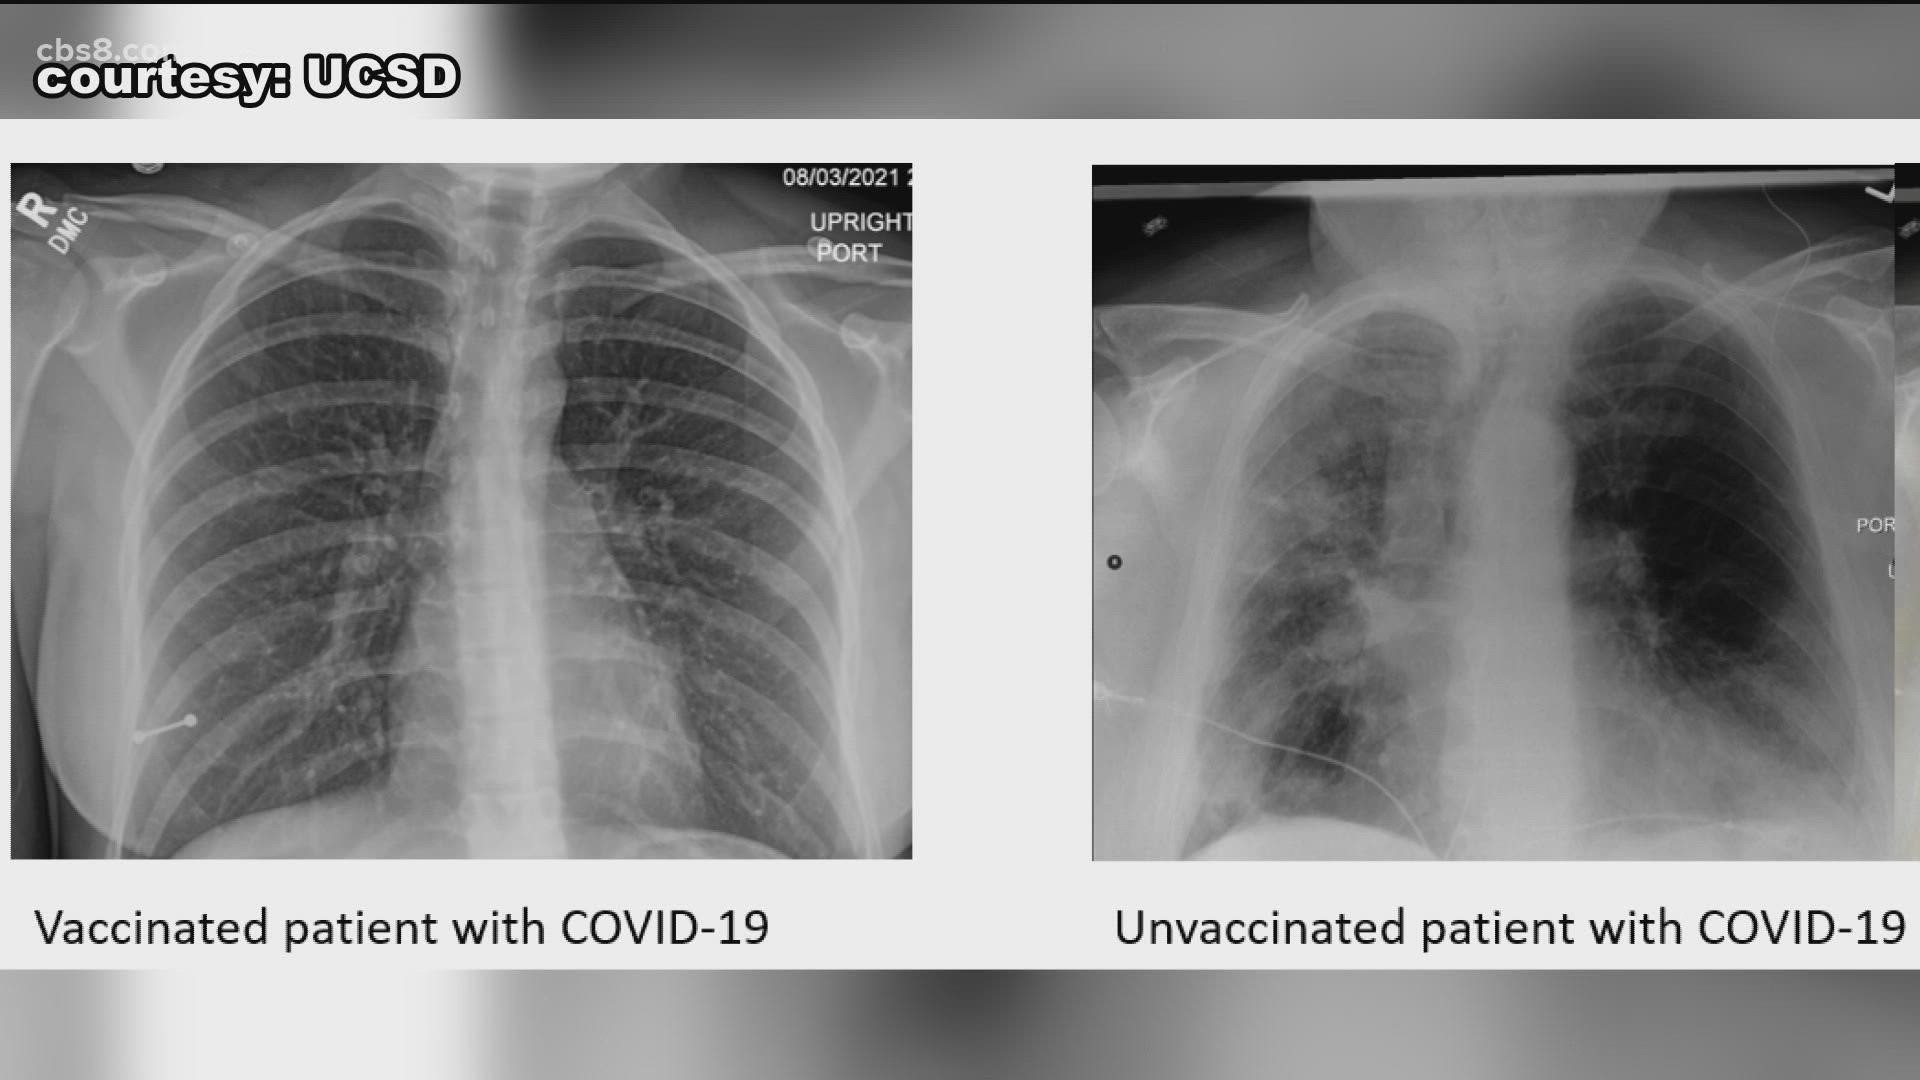 The unvaccinated X-ray shows severe lung damage.